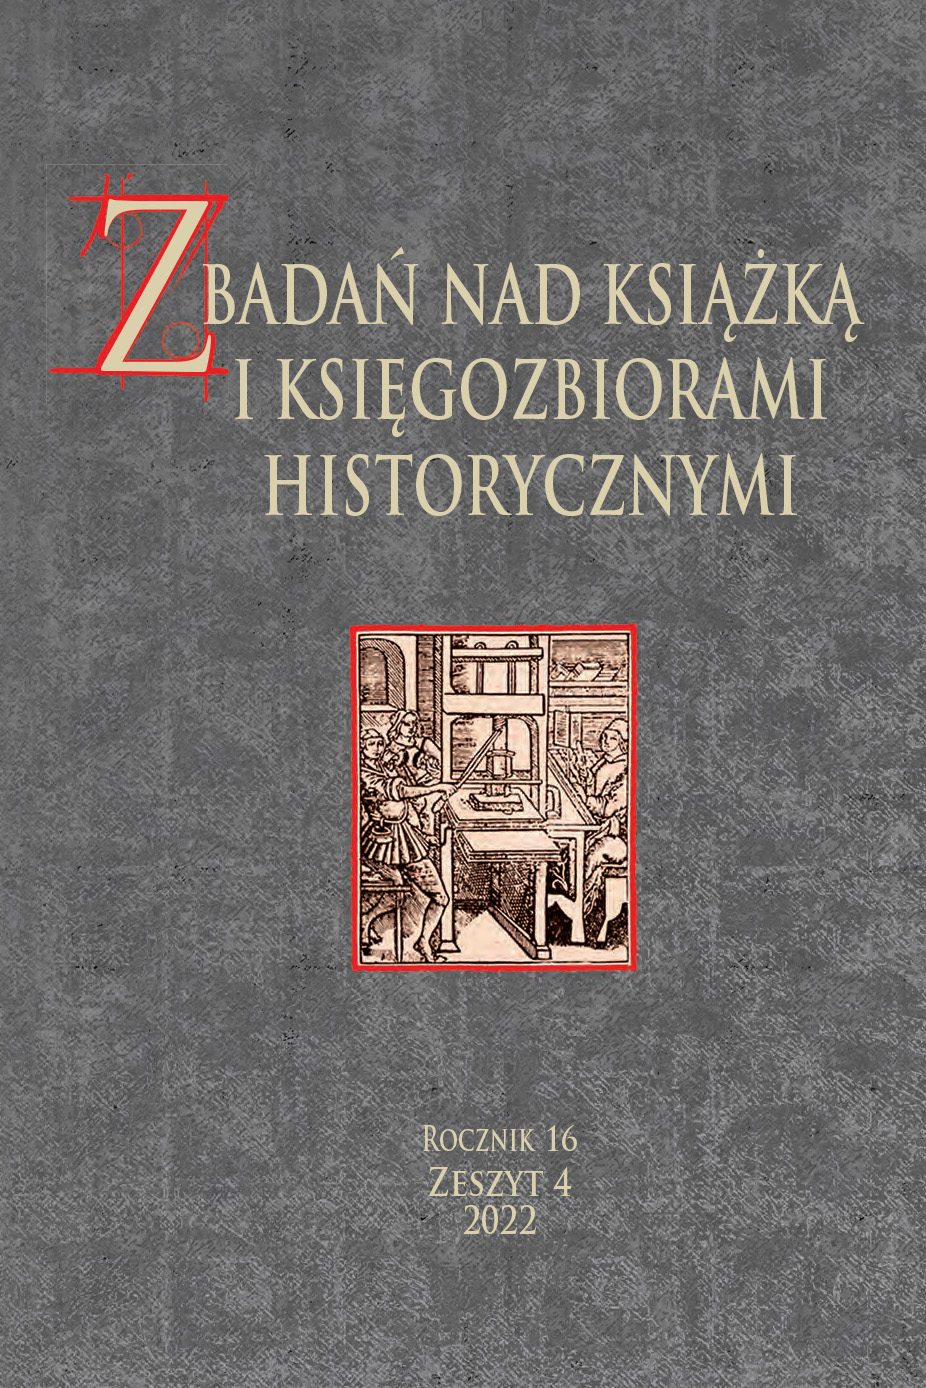 Bibliography of publications by prof. dr hab. Barbara Bieńkowska in chronological order Cover Image